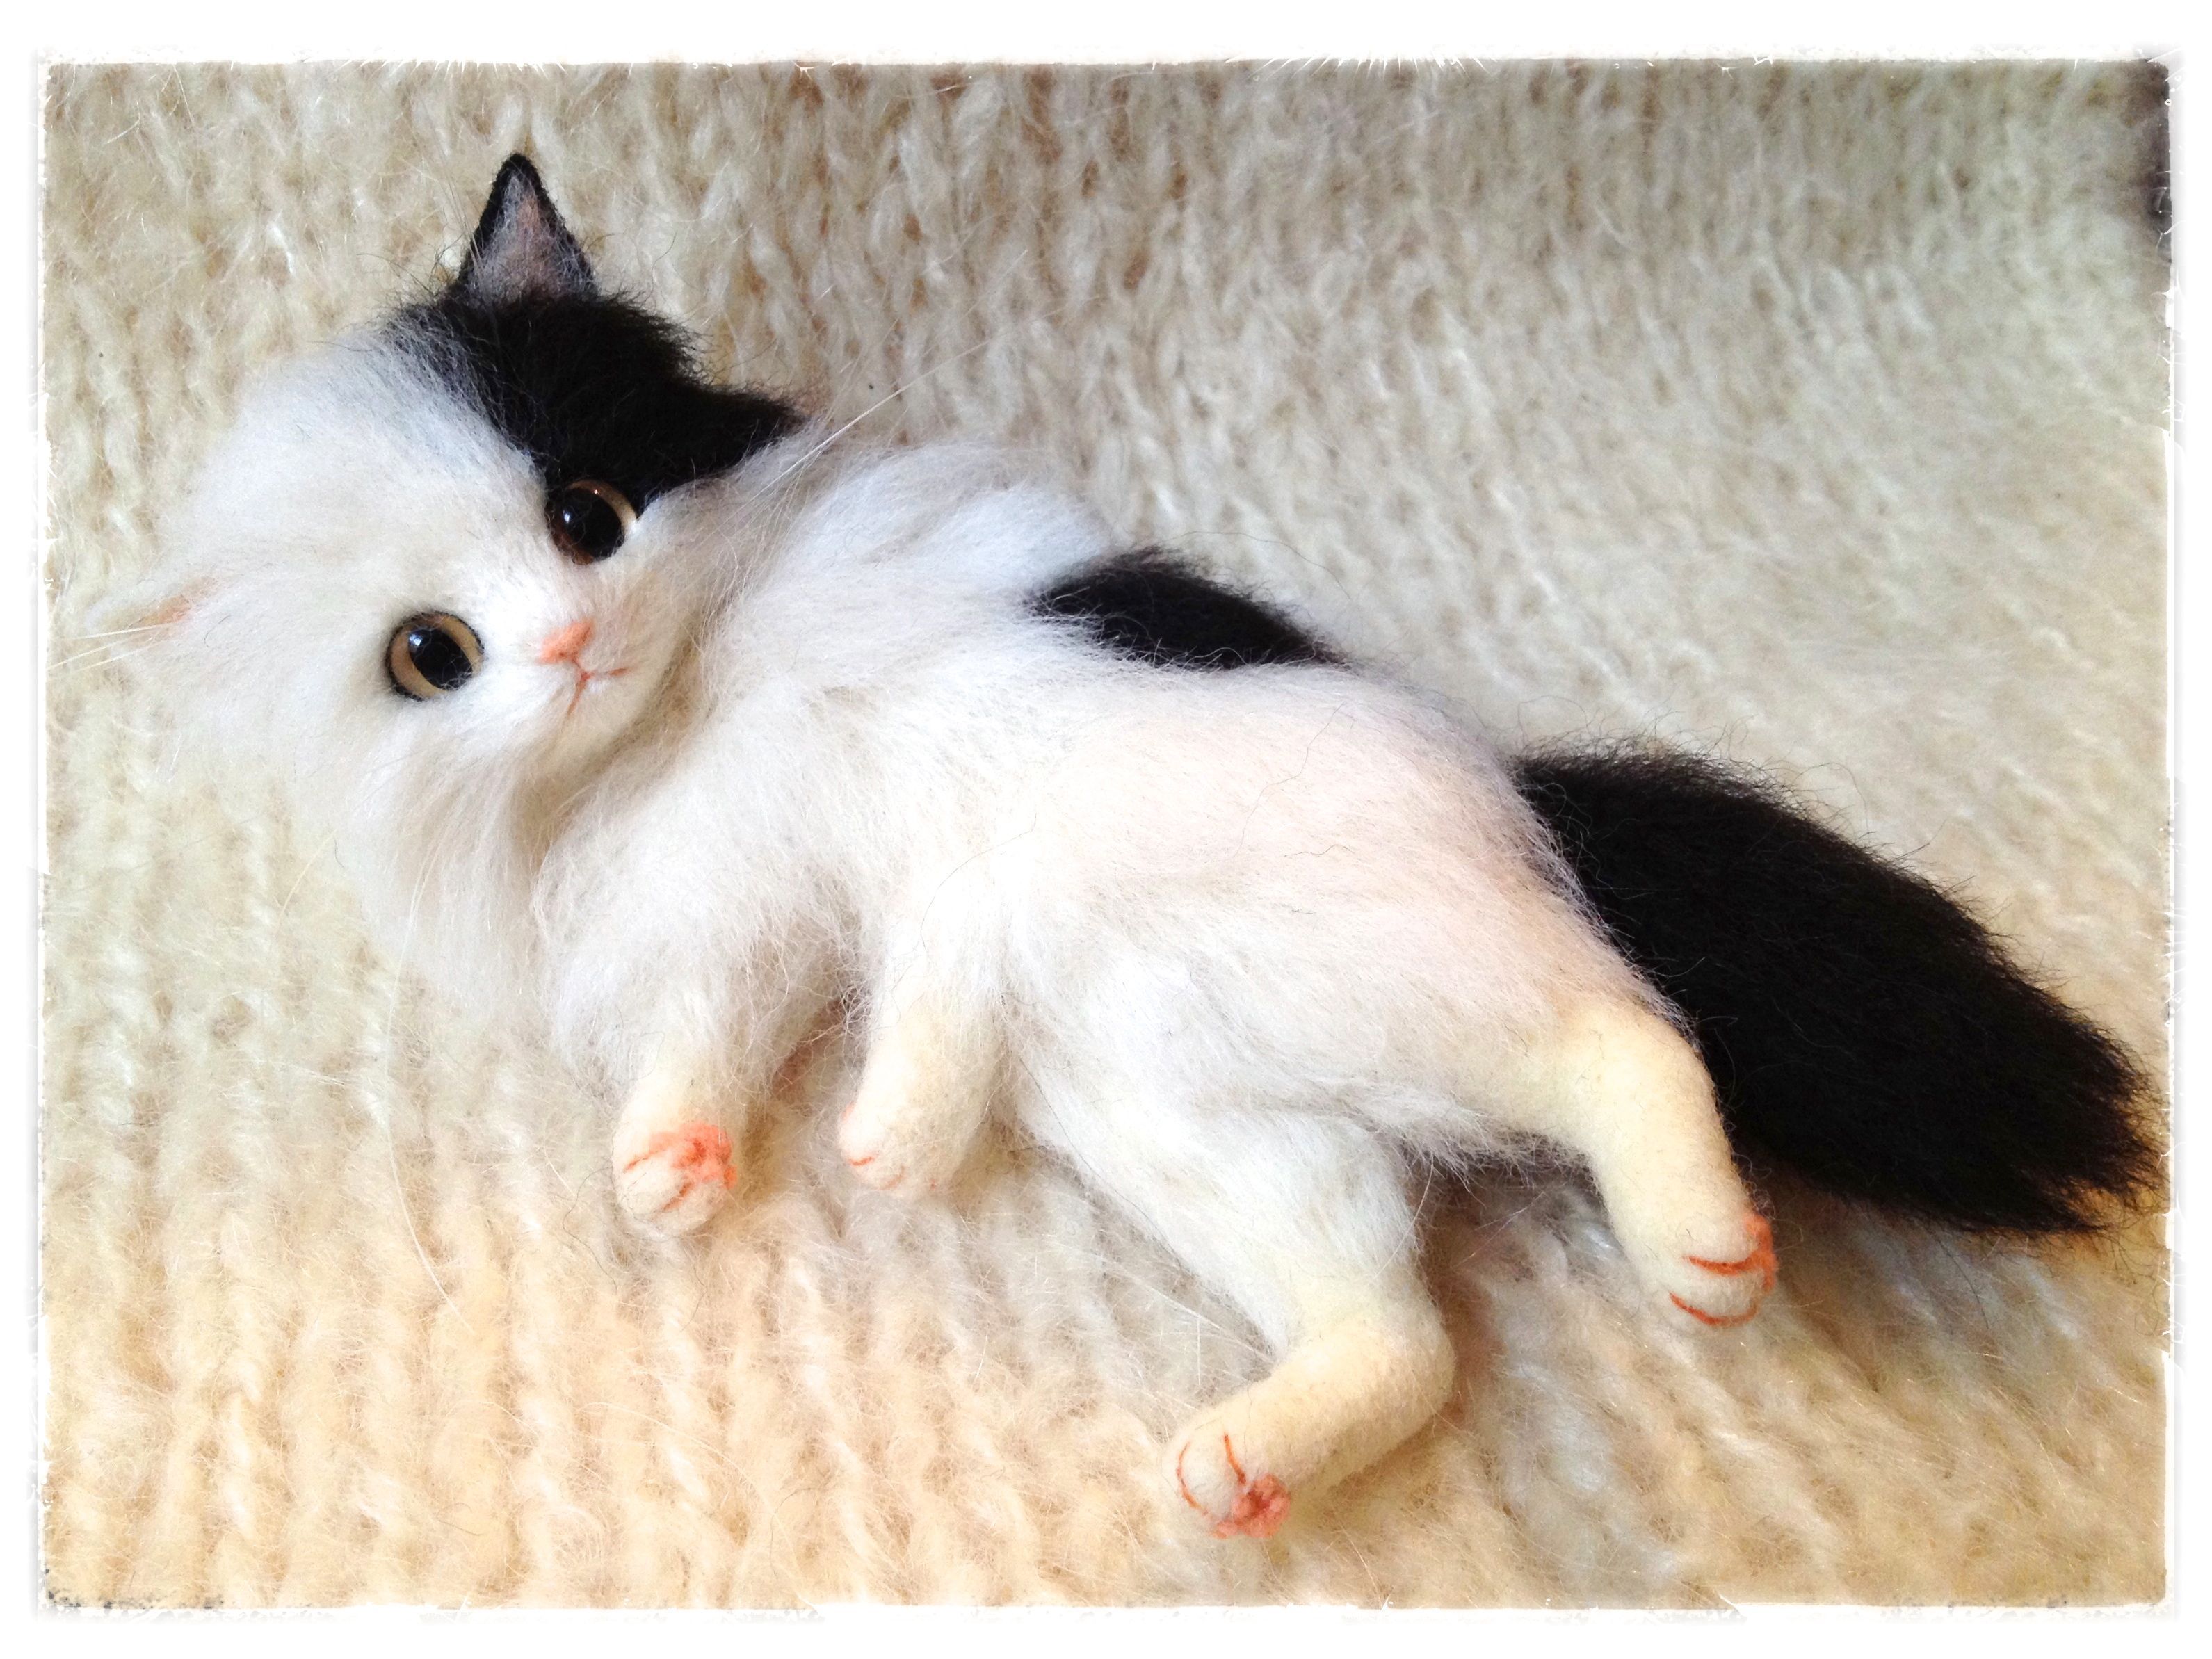 Needle felted black and white cat by Japanese artist Creamy